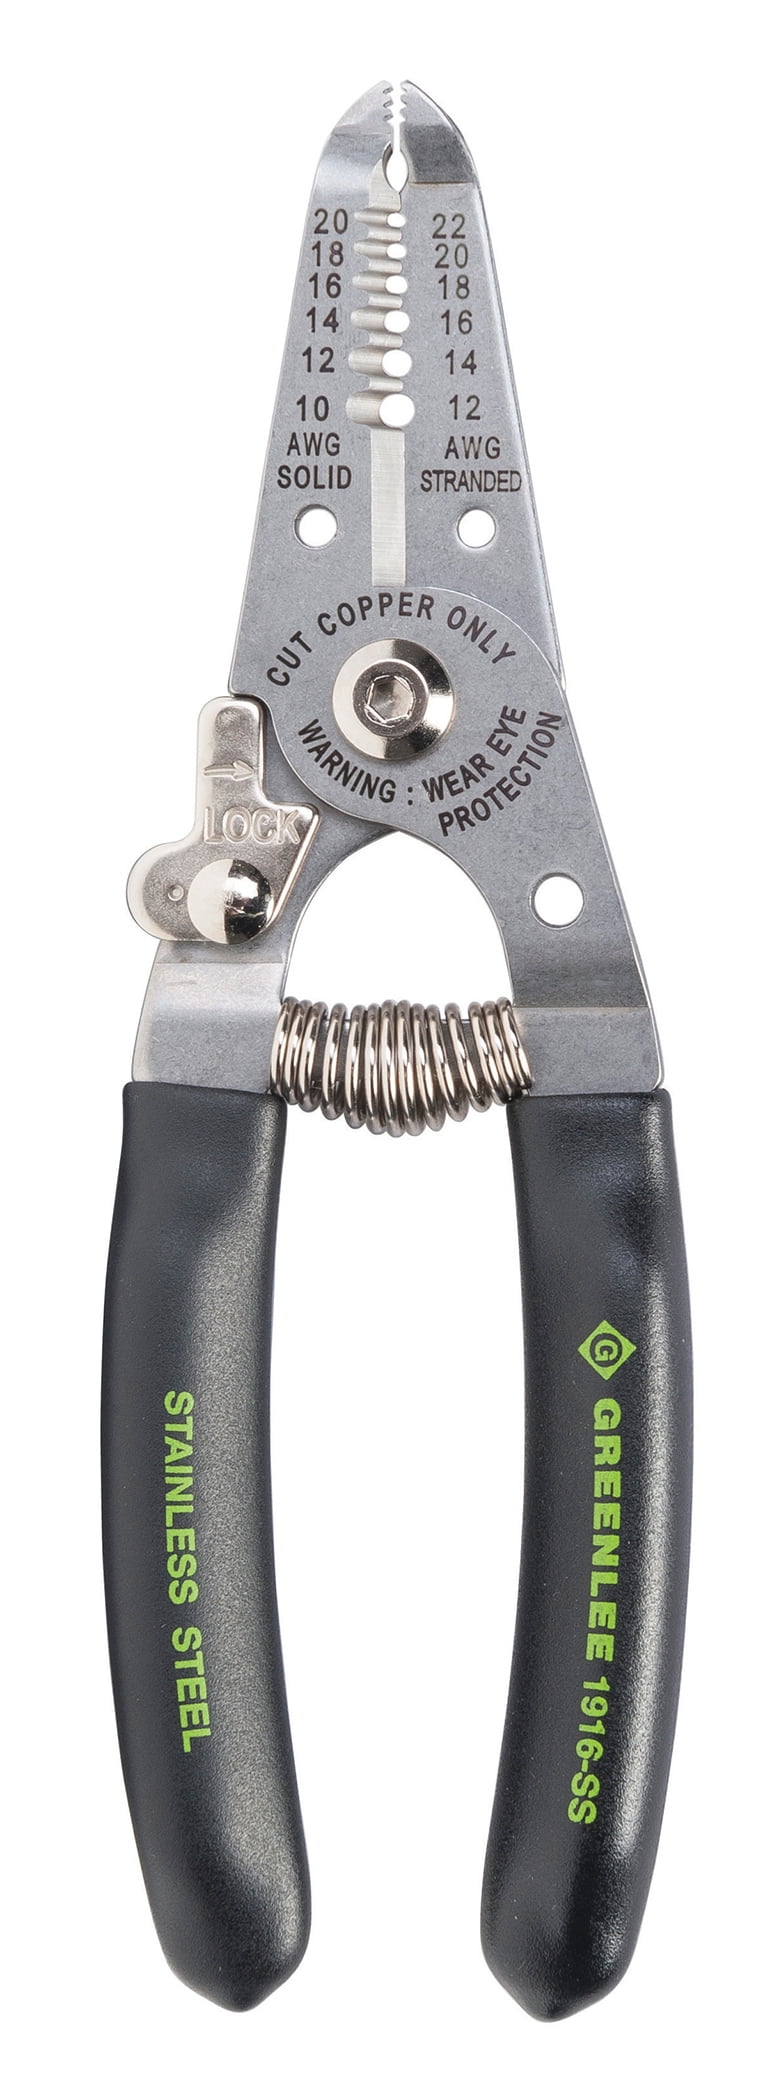 Greenlee 1916-ss Stainless Wire Stripper and Cutter 10-20awg 6in for sale online 